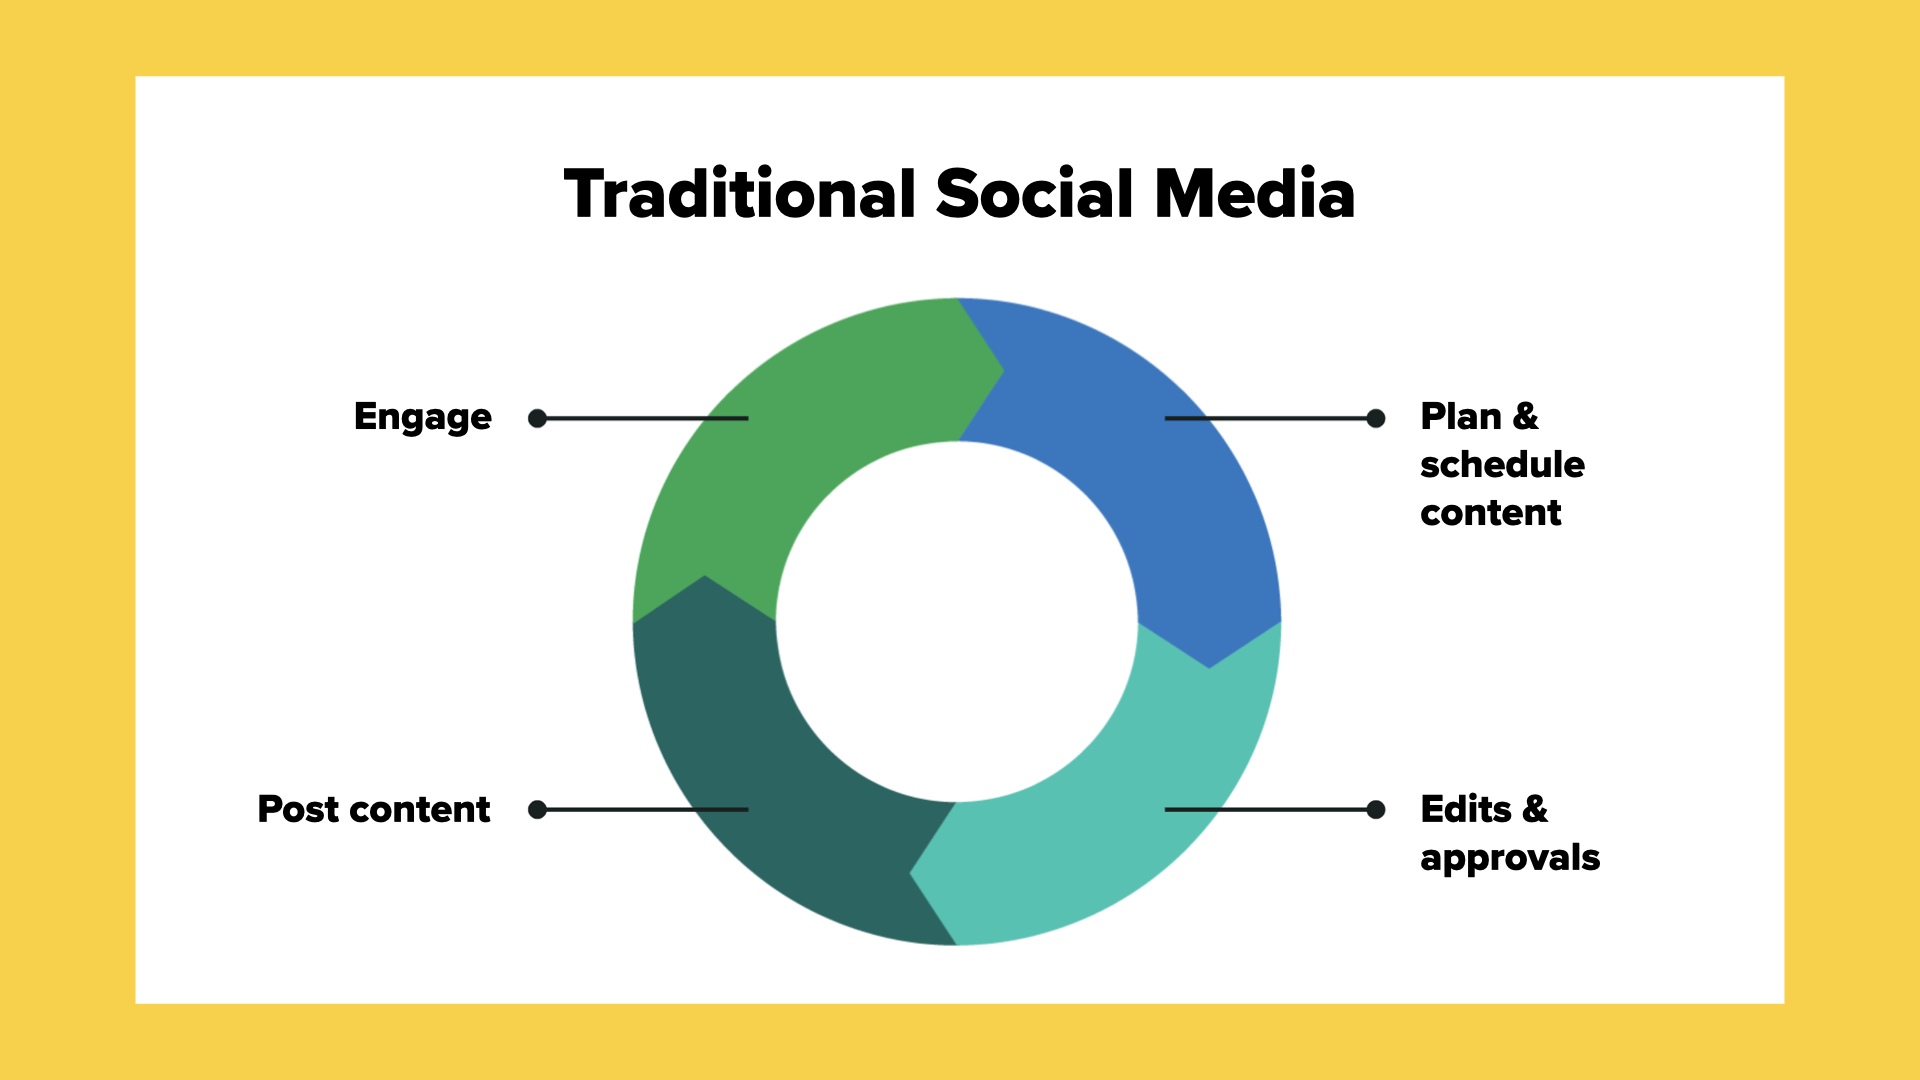 Cycle arrow diagram showing traditional social media is to: plan & schedule content, edit & seek approval, post content, engage